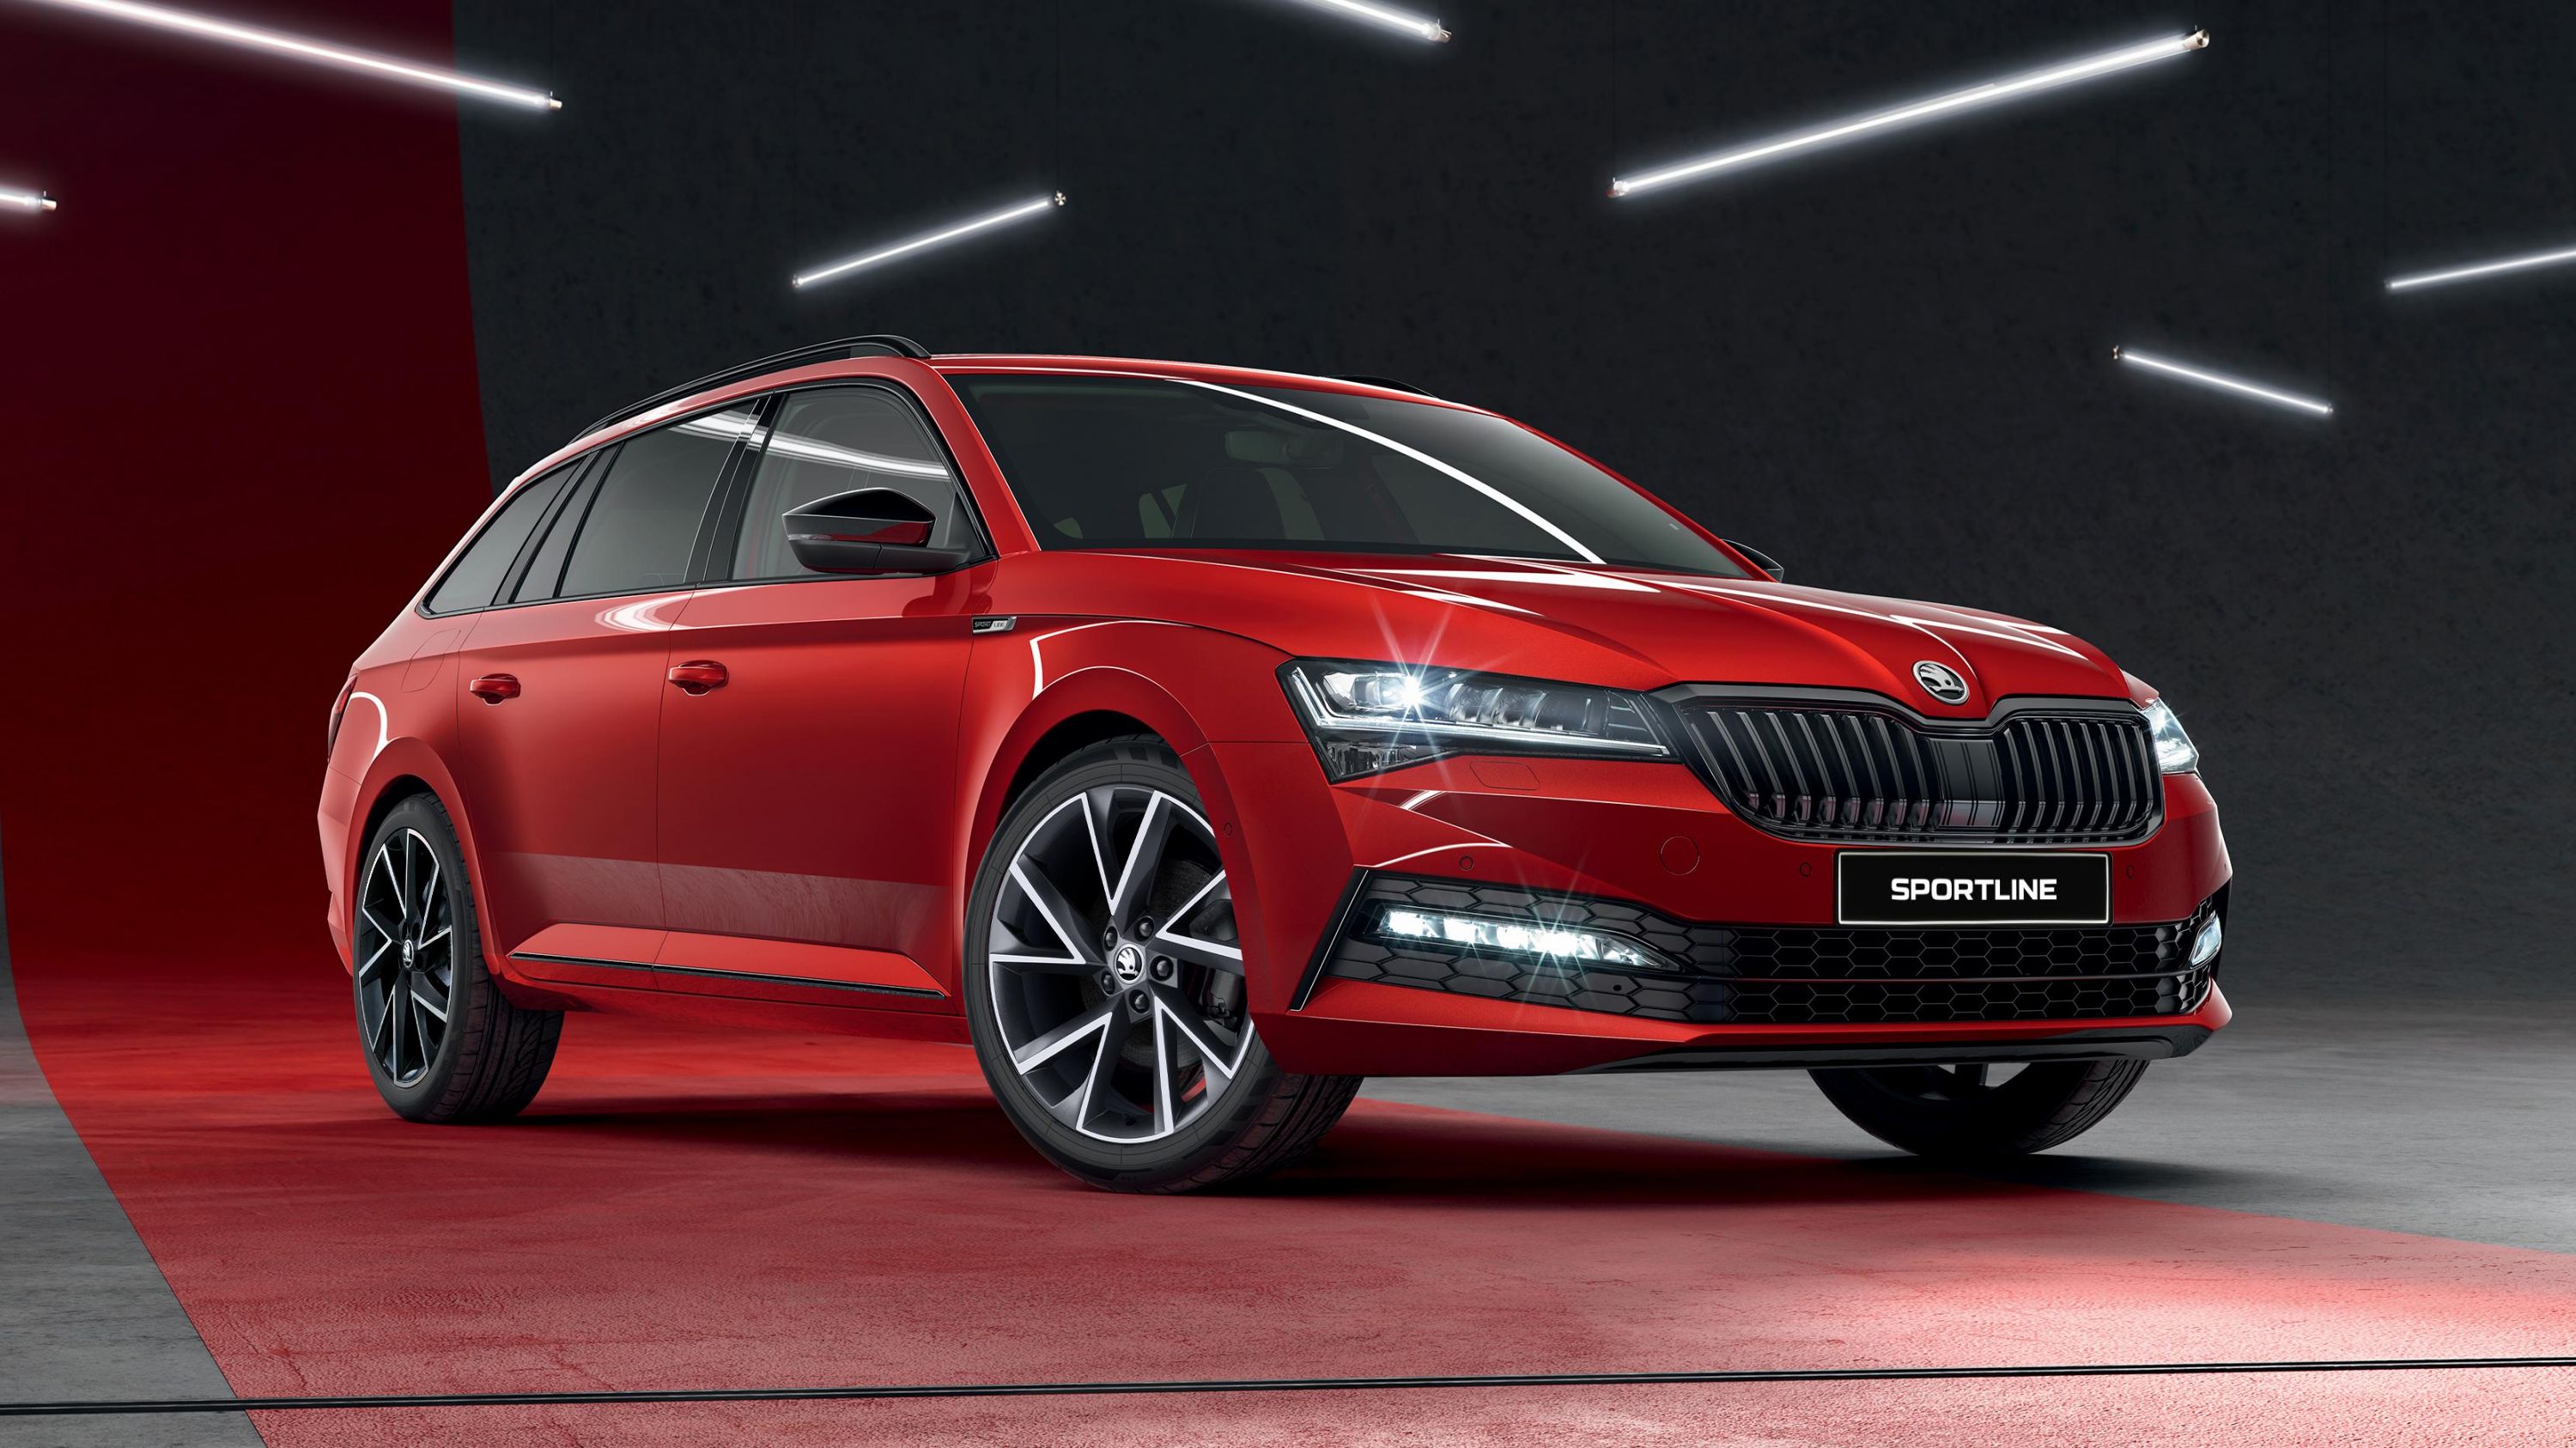 New 2019 Skoda Superb: prices and specs announced